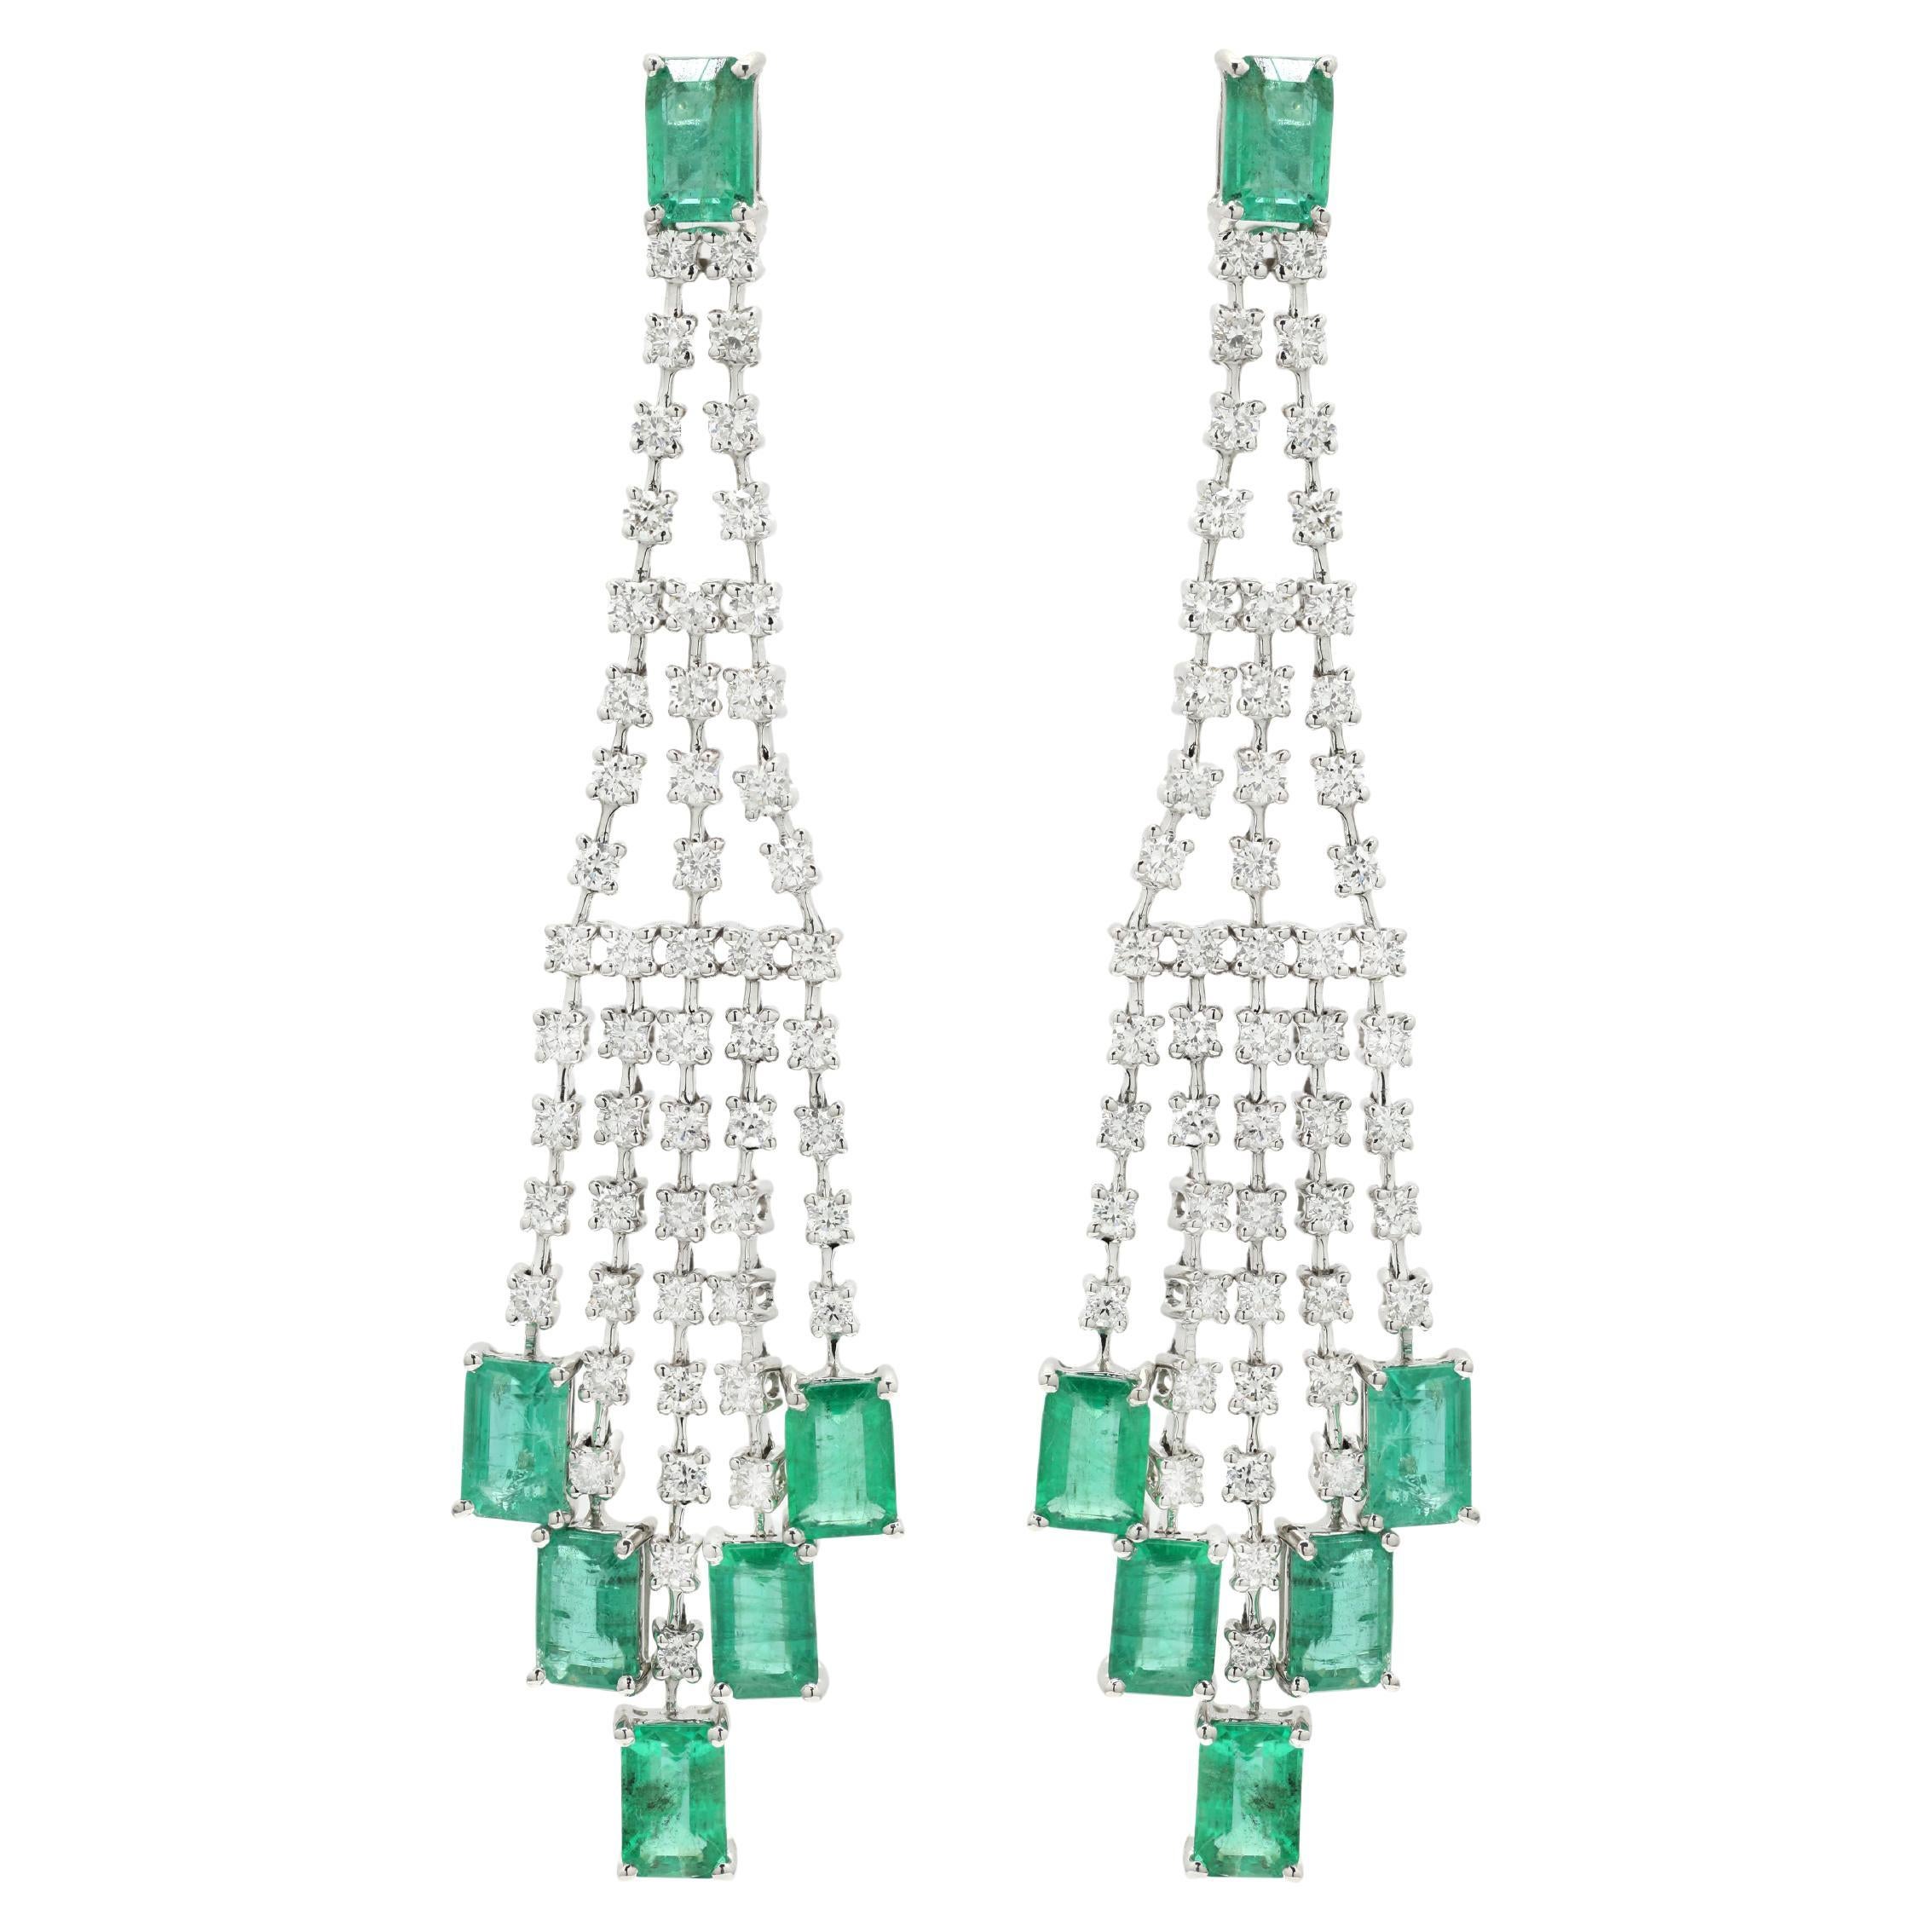 Natural 5.43 Ct Emerald Dazzling Long Earrings in 14K White Gold with Diamonds